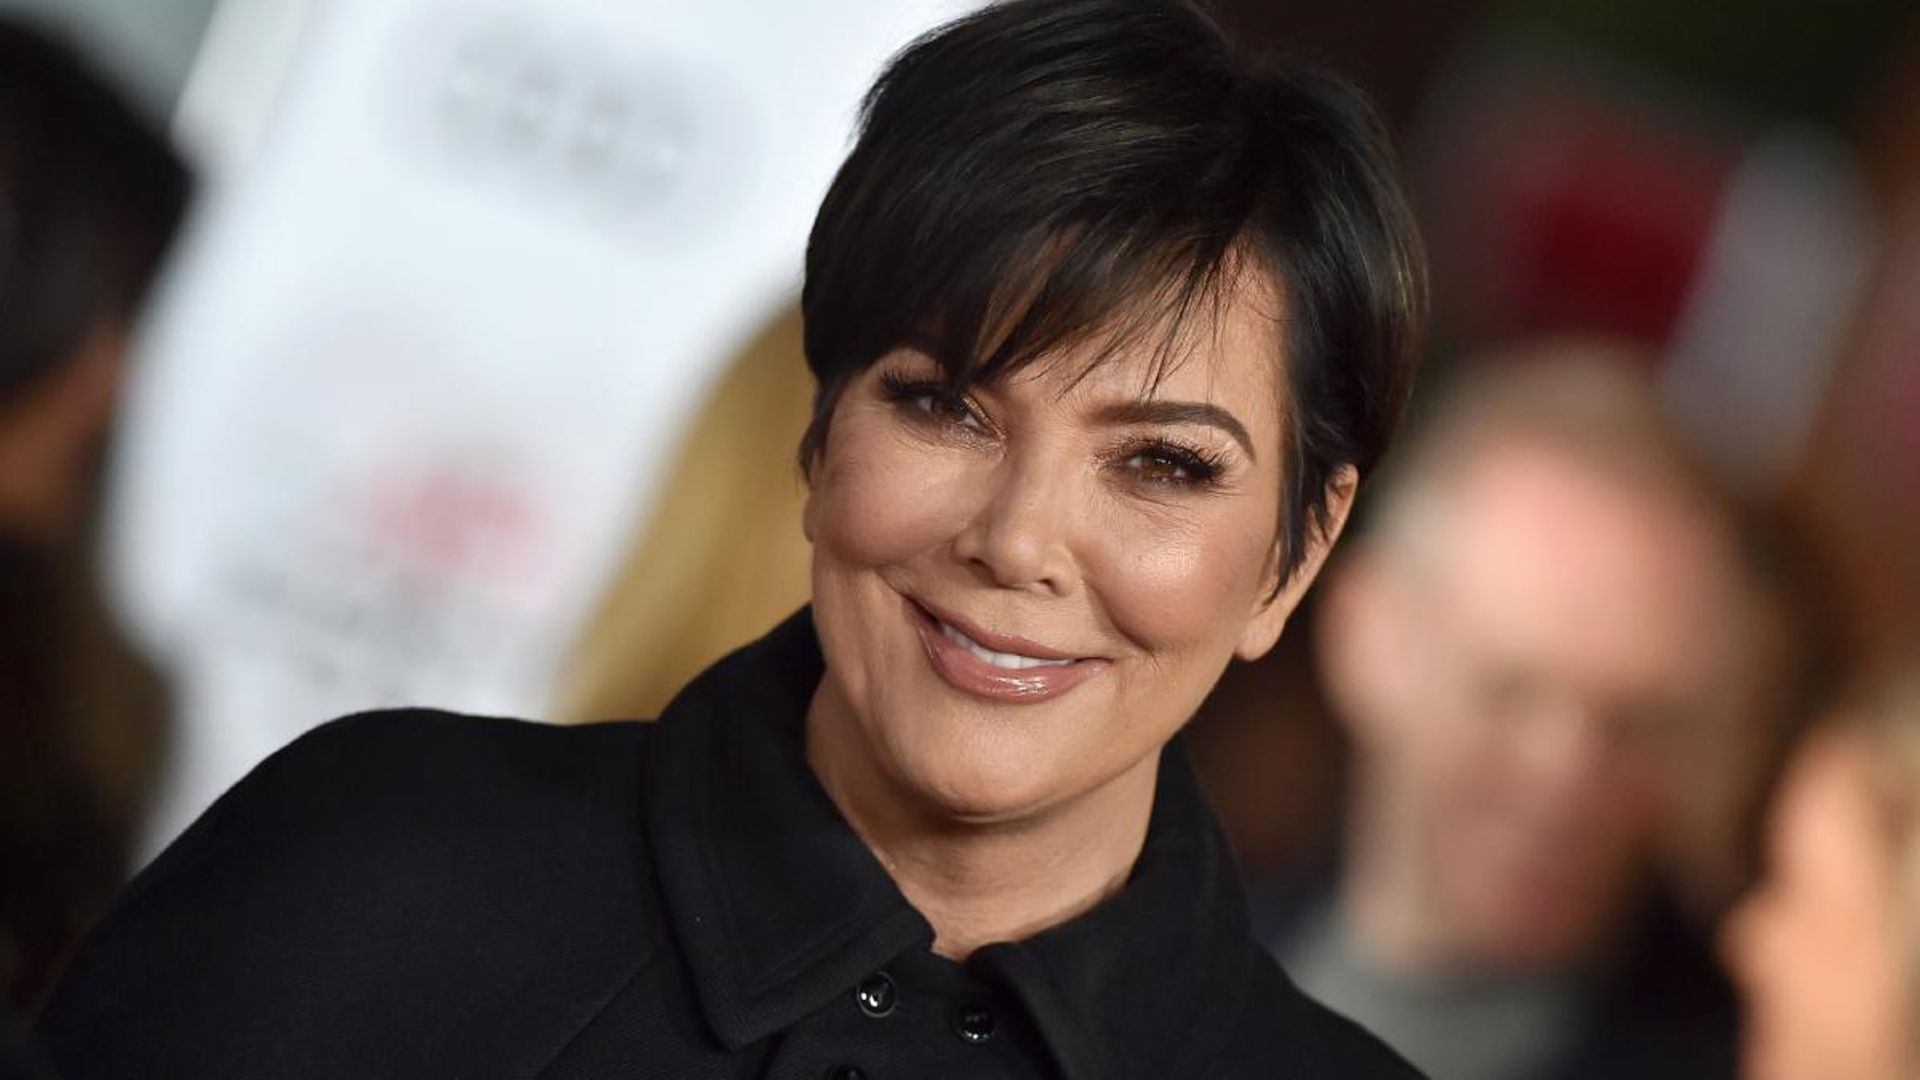 Kris Jenner as you have never seen her before inside her living room during lockdown